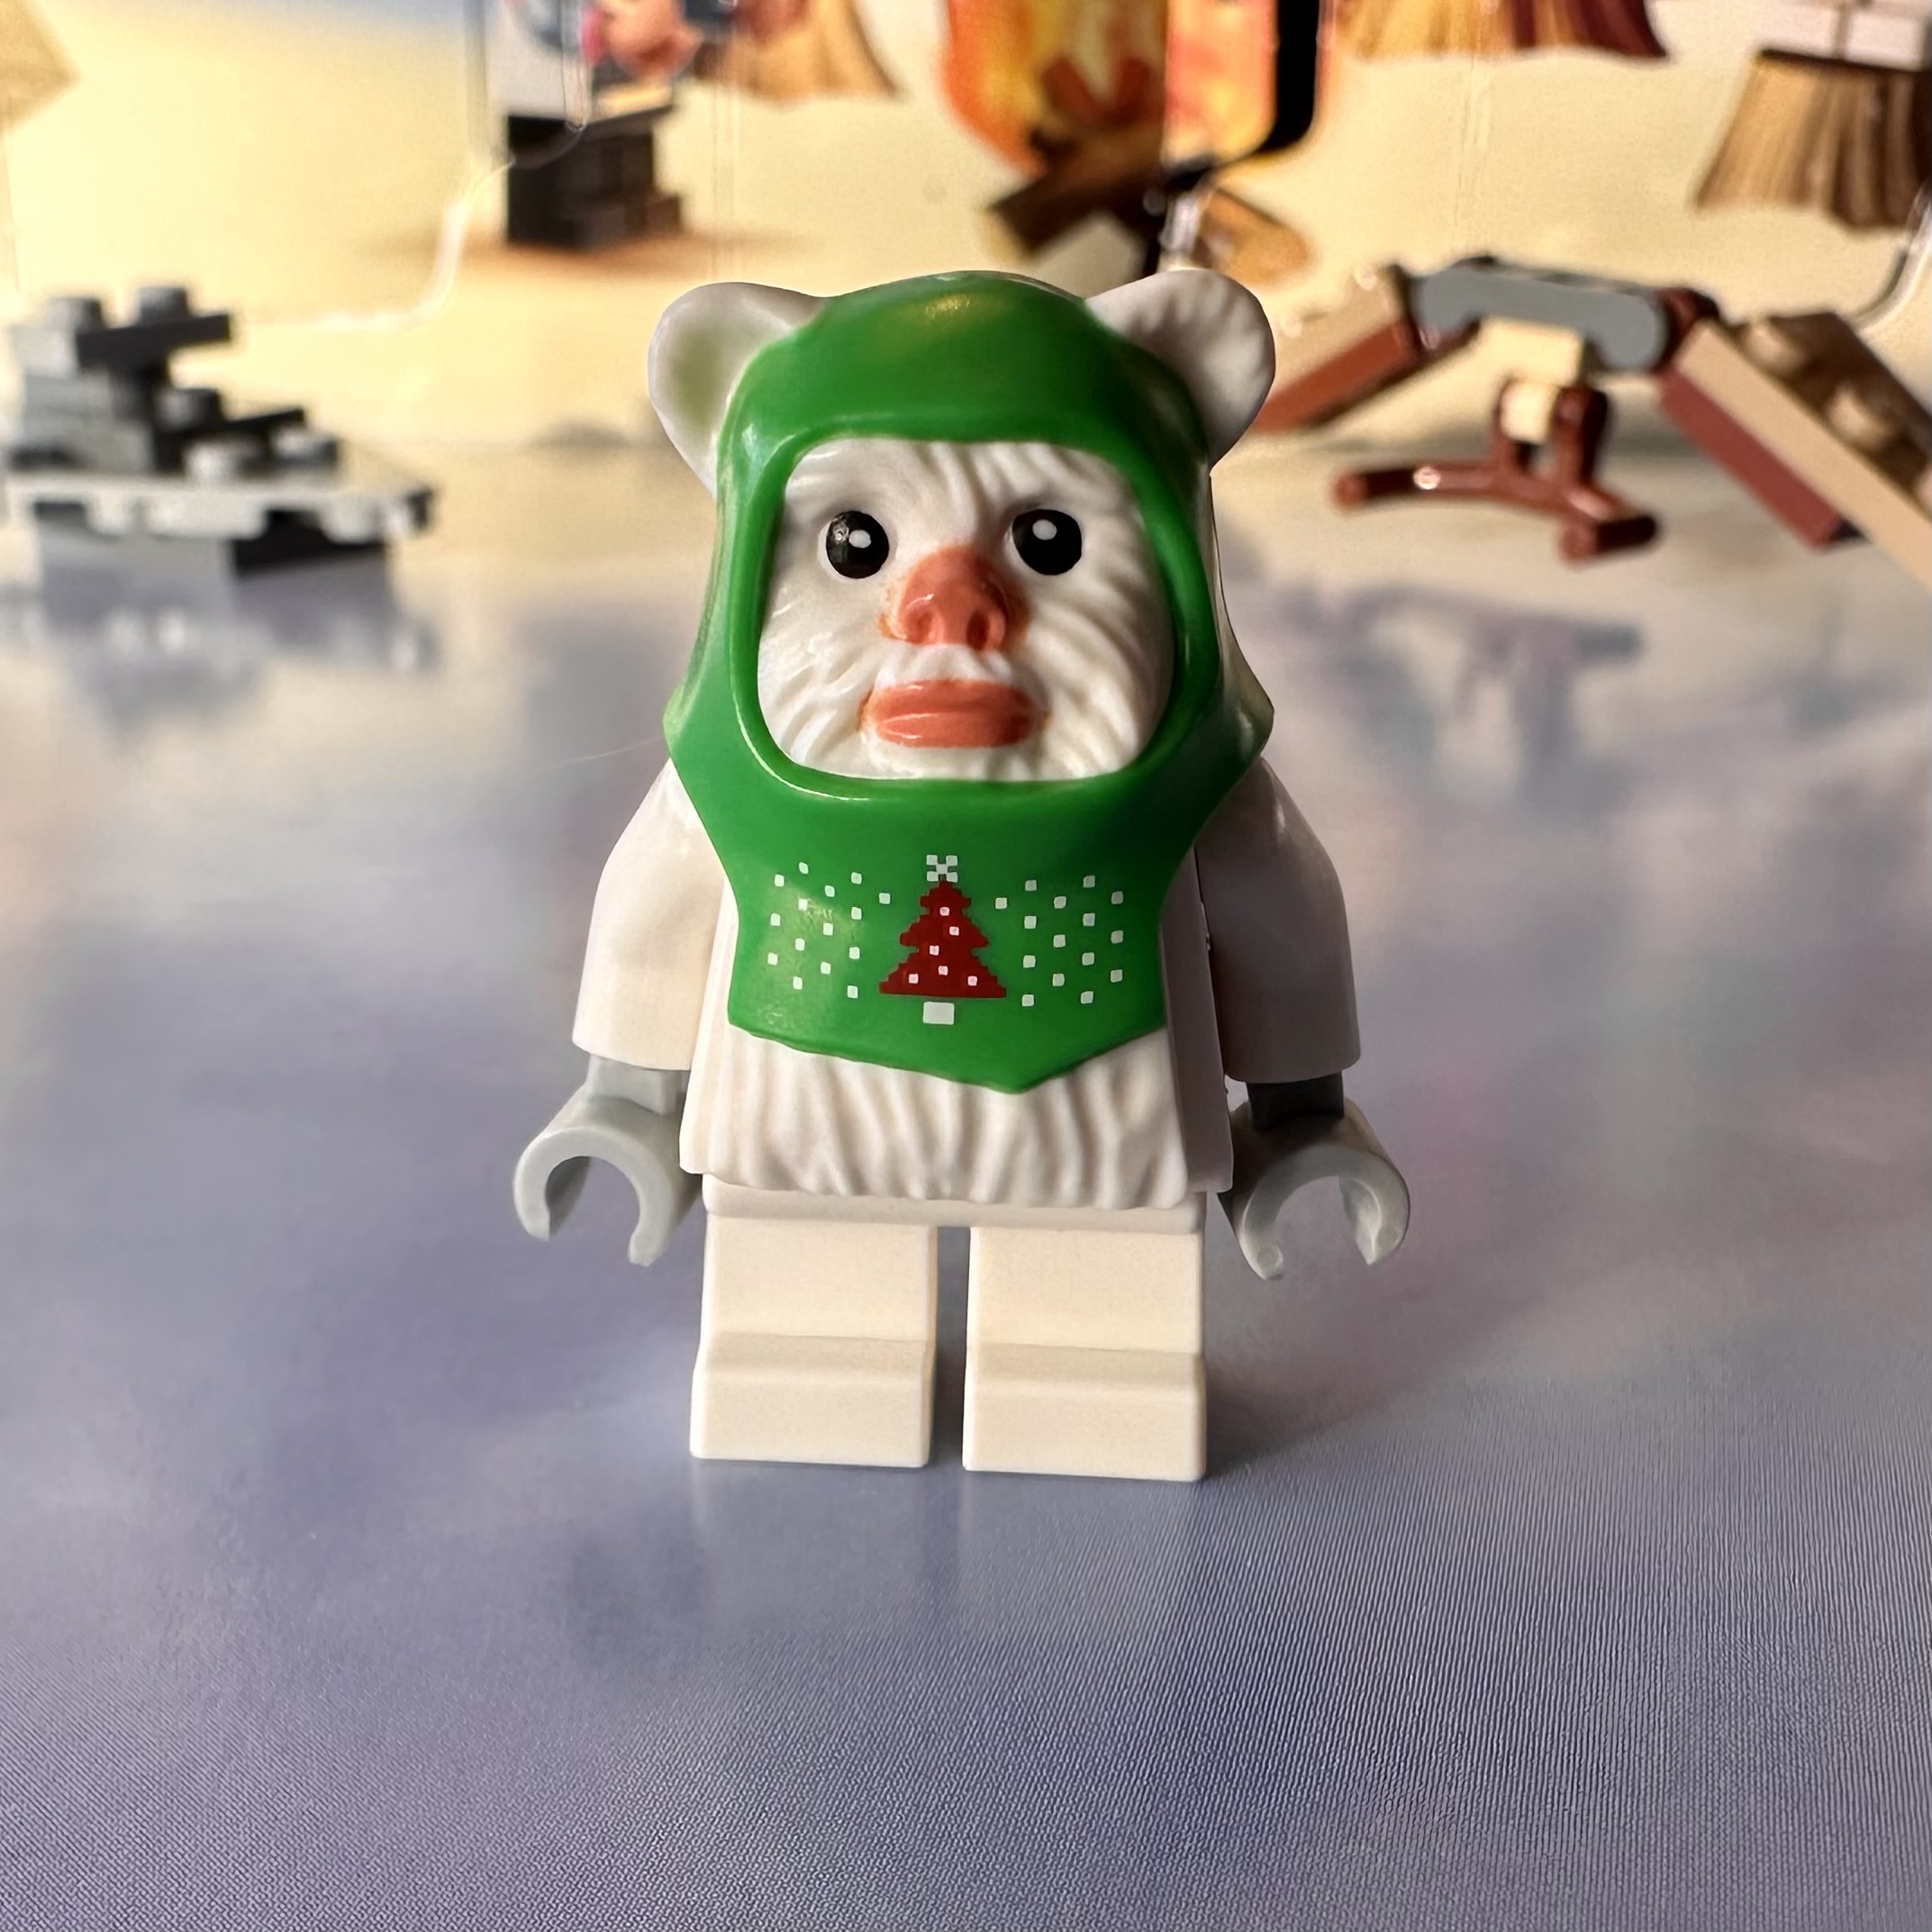 LEGO ewok minifigure. The ewok is white and it's wearing a green headdress with an ugly-sweater style Christmas tree and snow pattern on it.